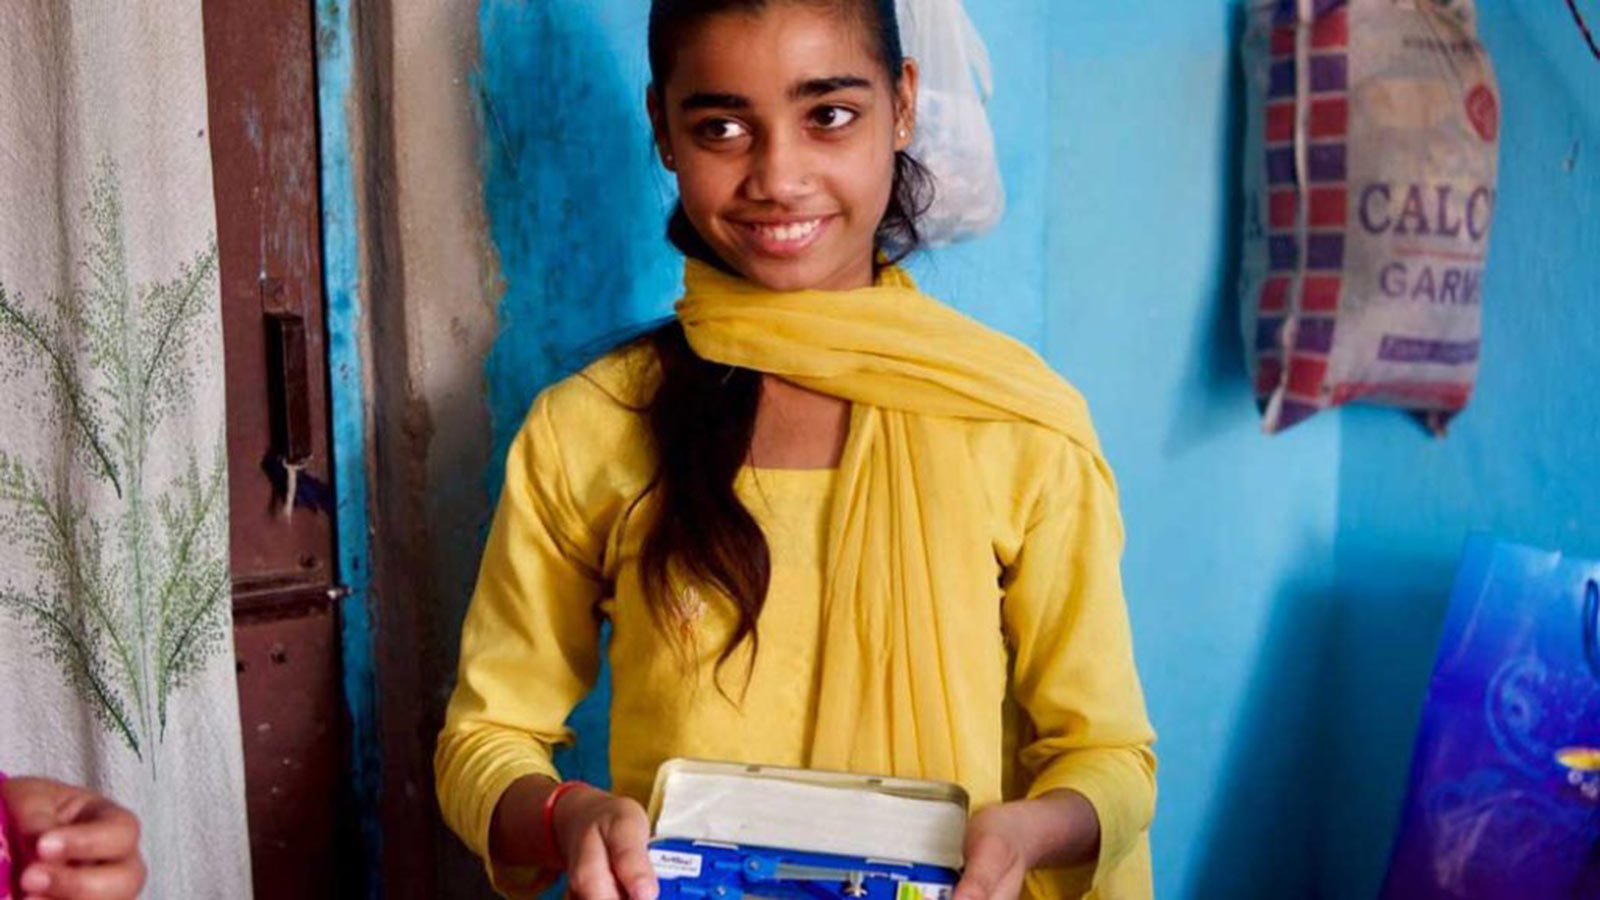 Smiing girl in yellow sari who received educational support